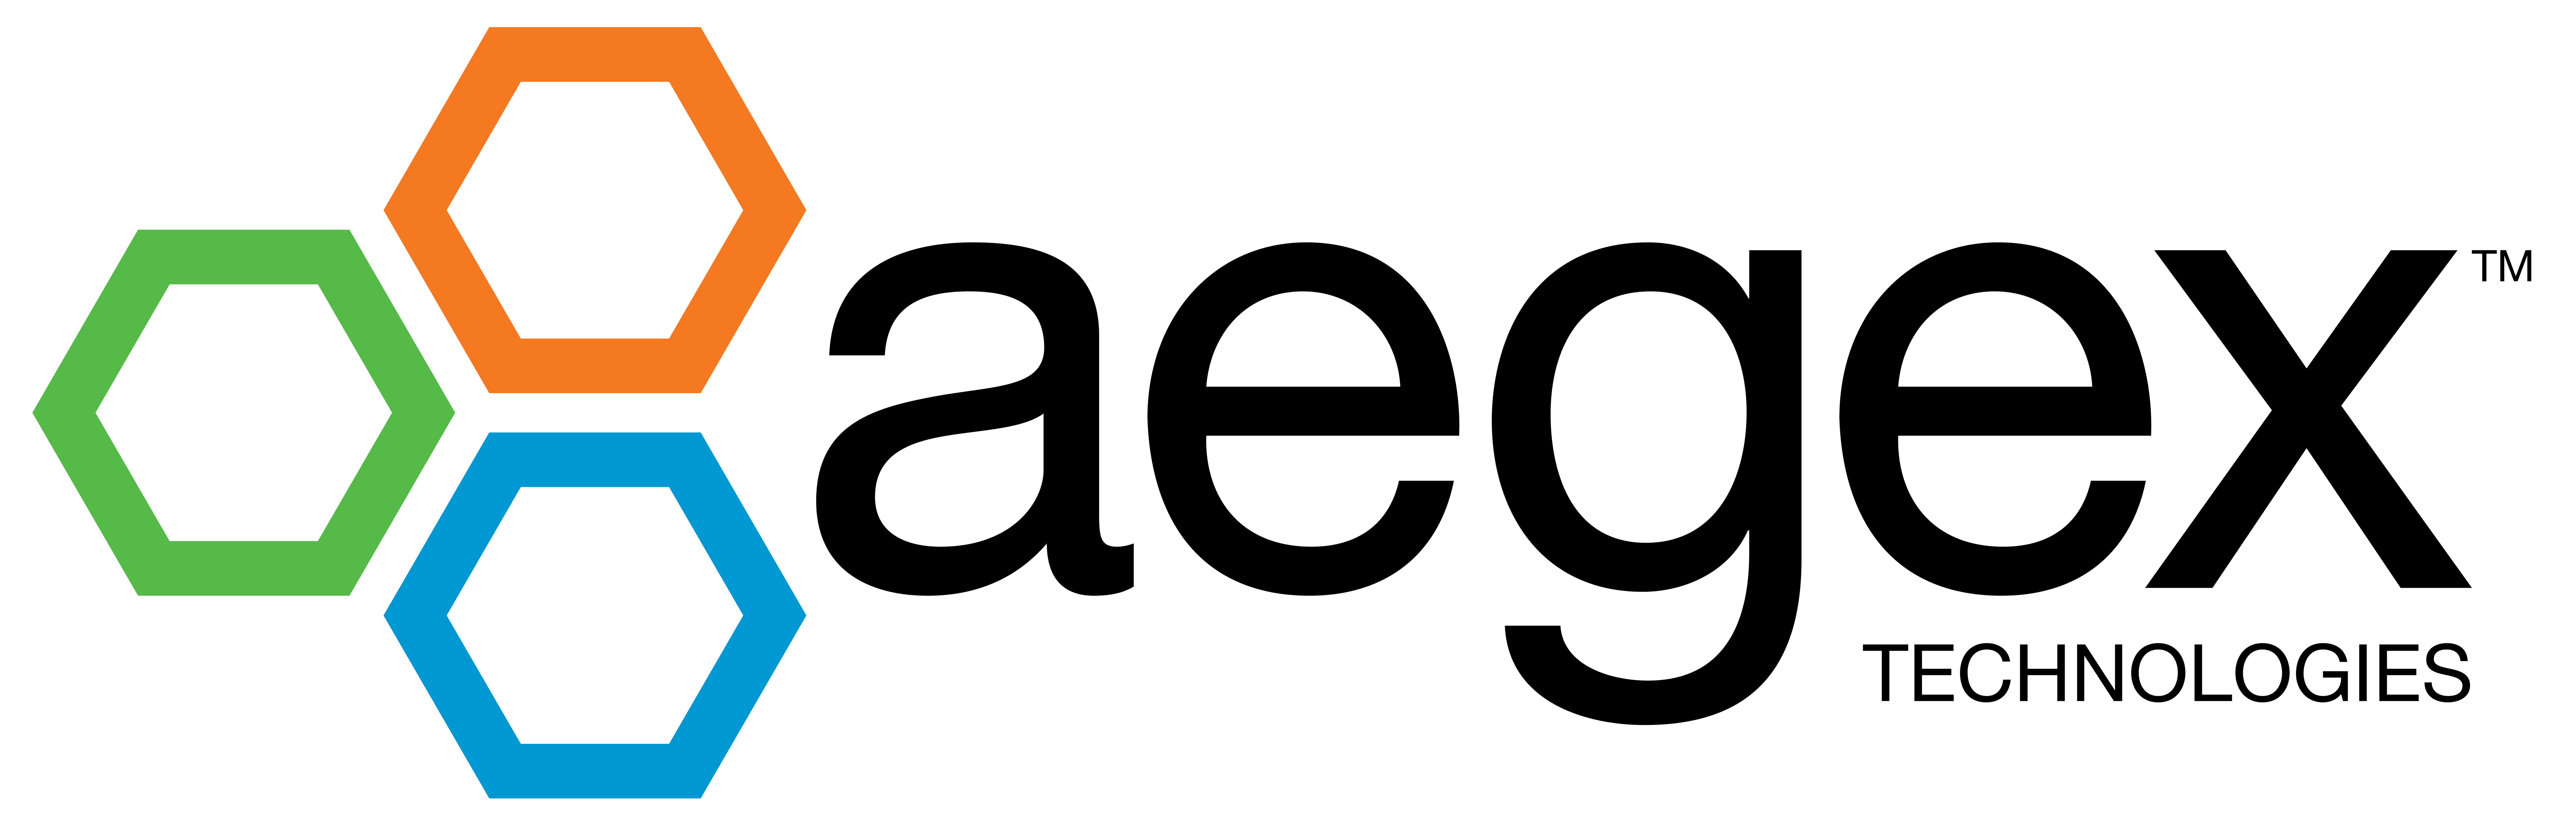 Aegex10 IS Tablets to run Windows IoT Enterprise from 1st August 2019